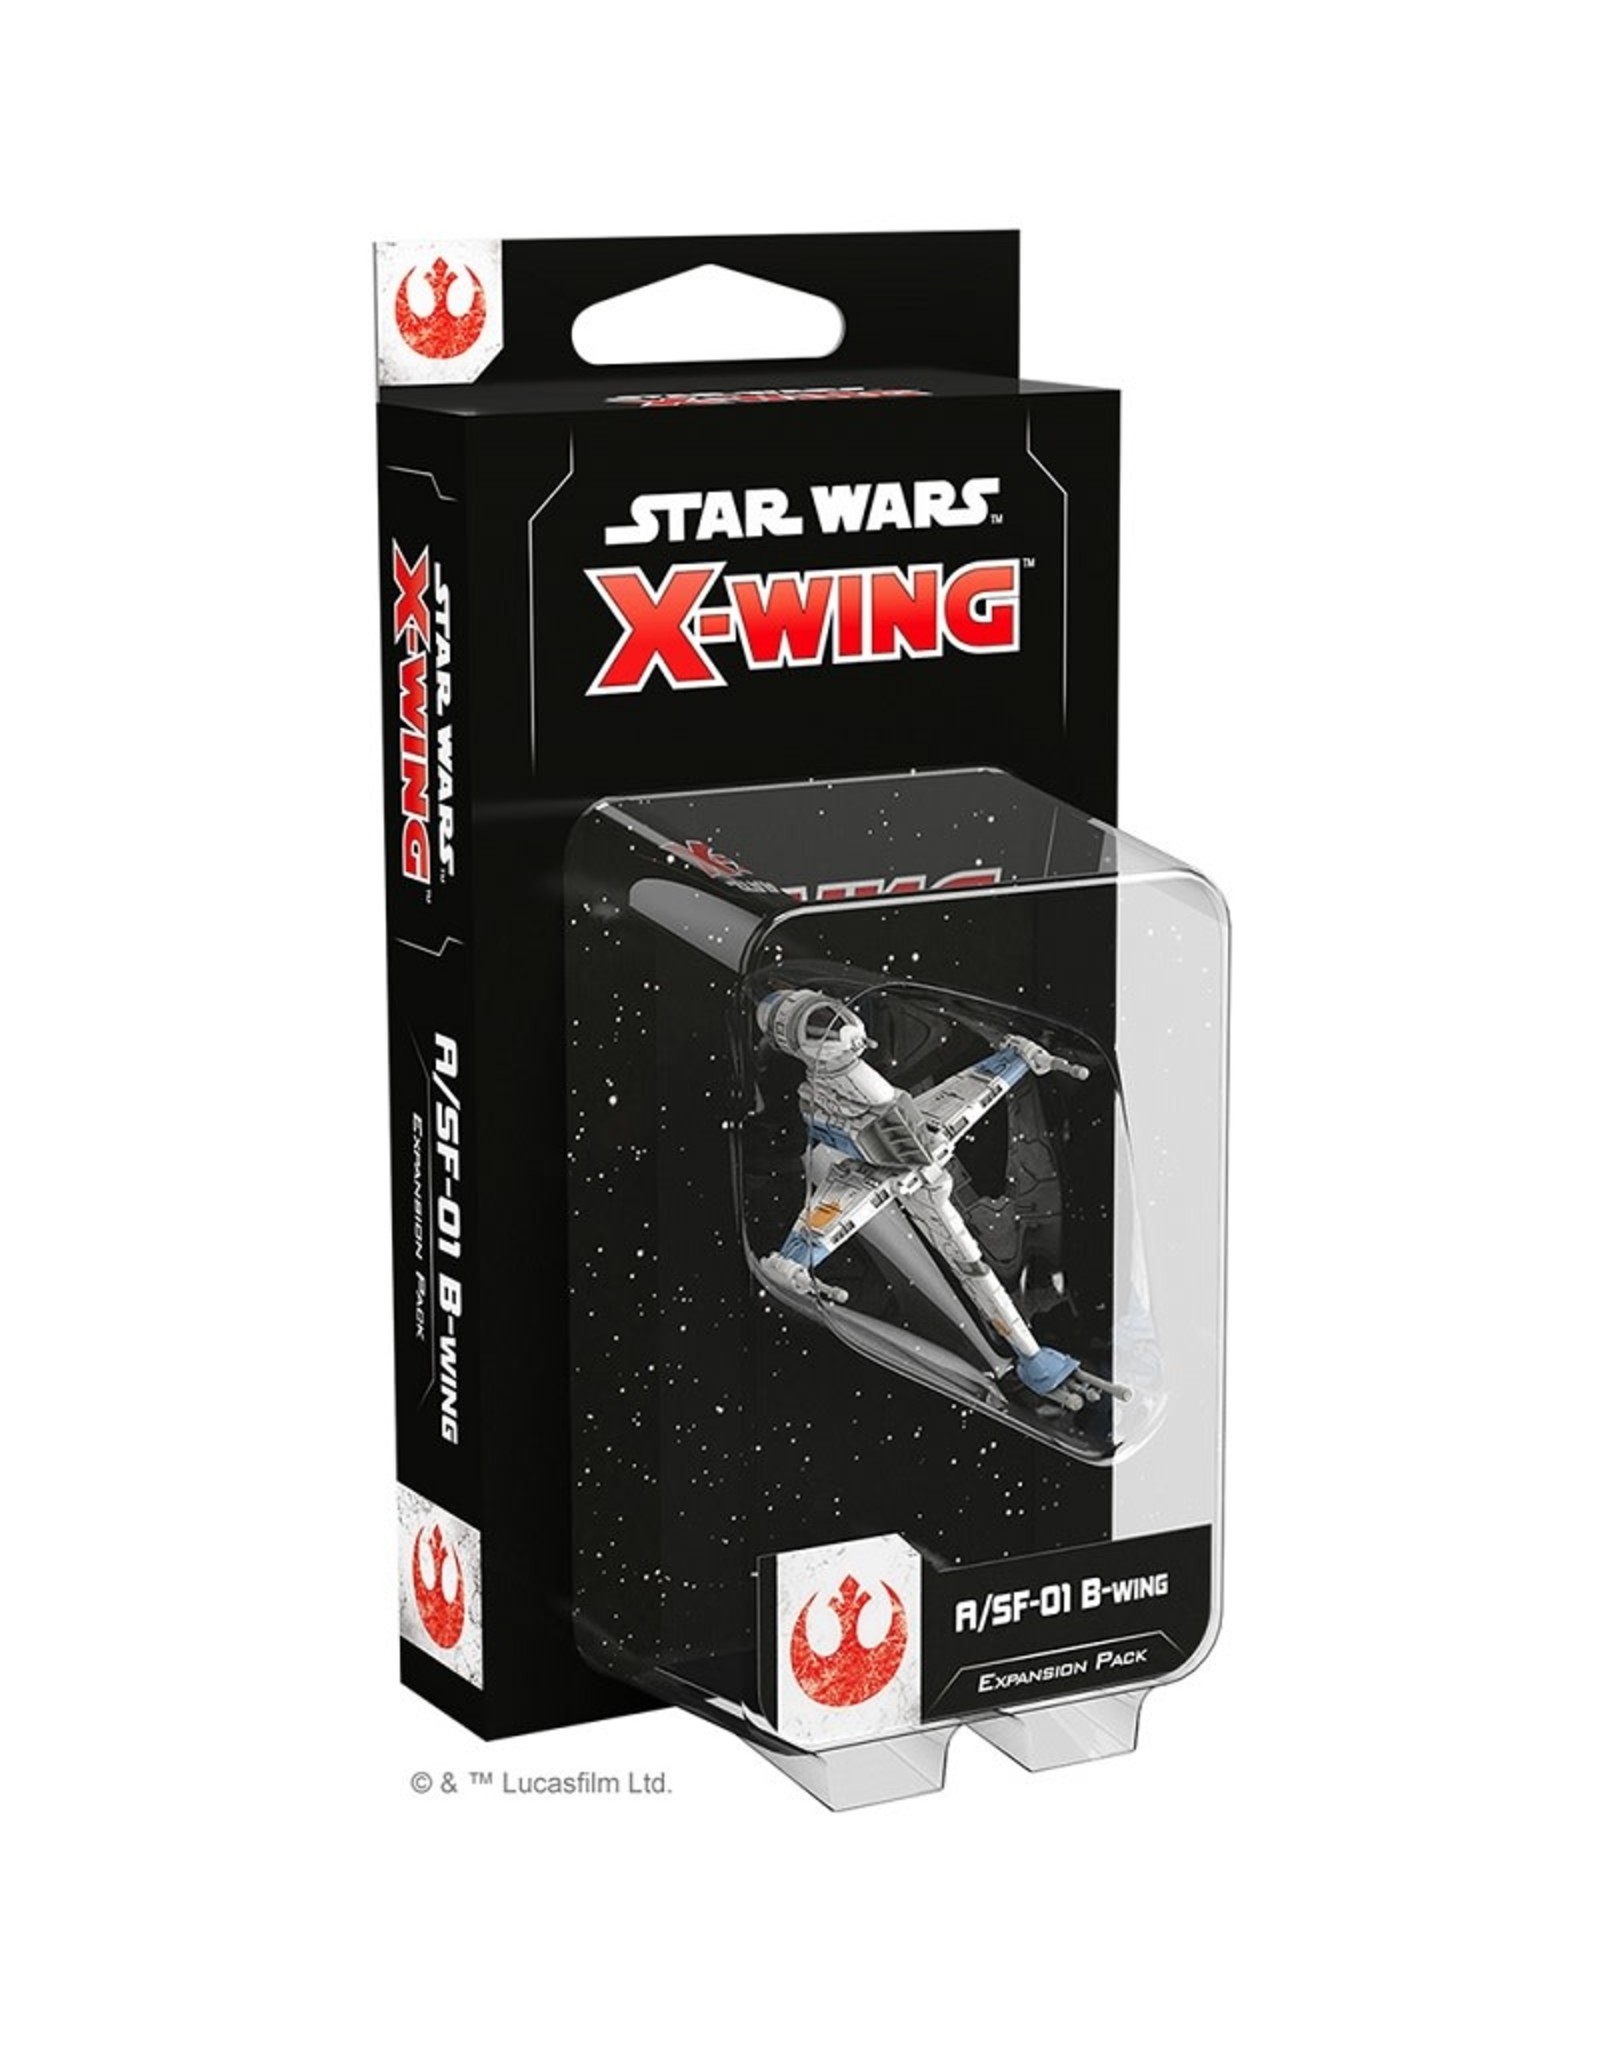 Atomic Mass Games Star Wars X-Wing: A-SF-01 B-Wing - 2nd Edition